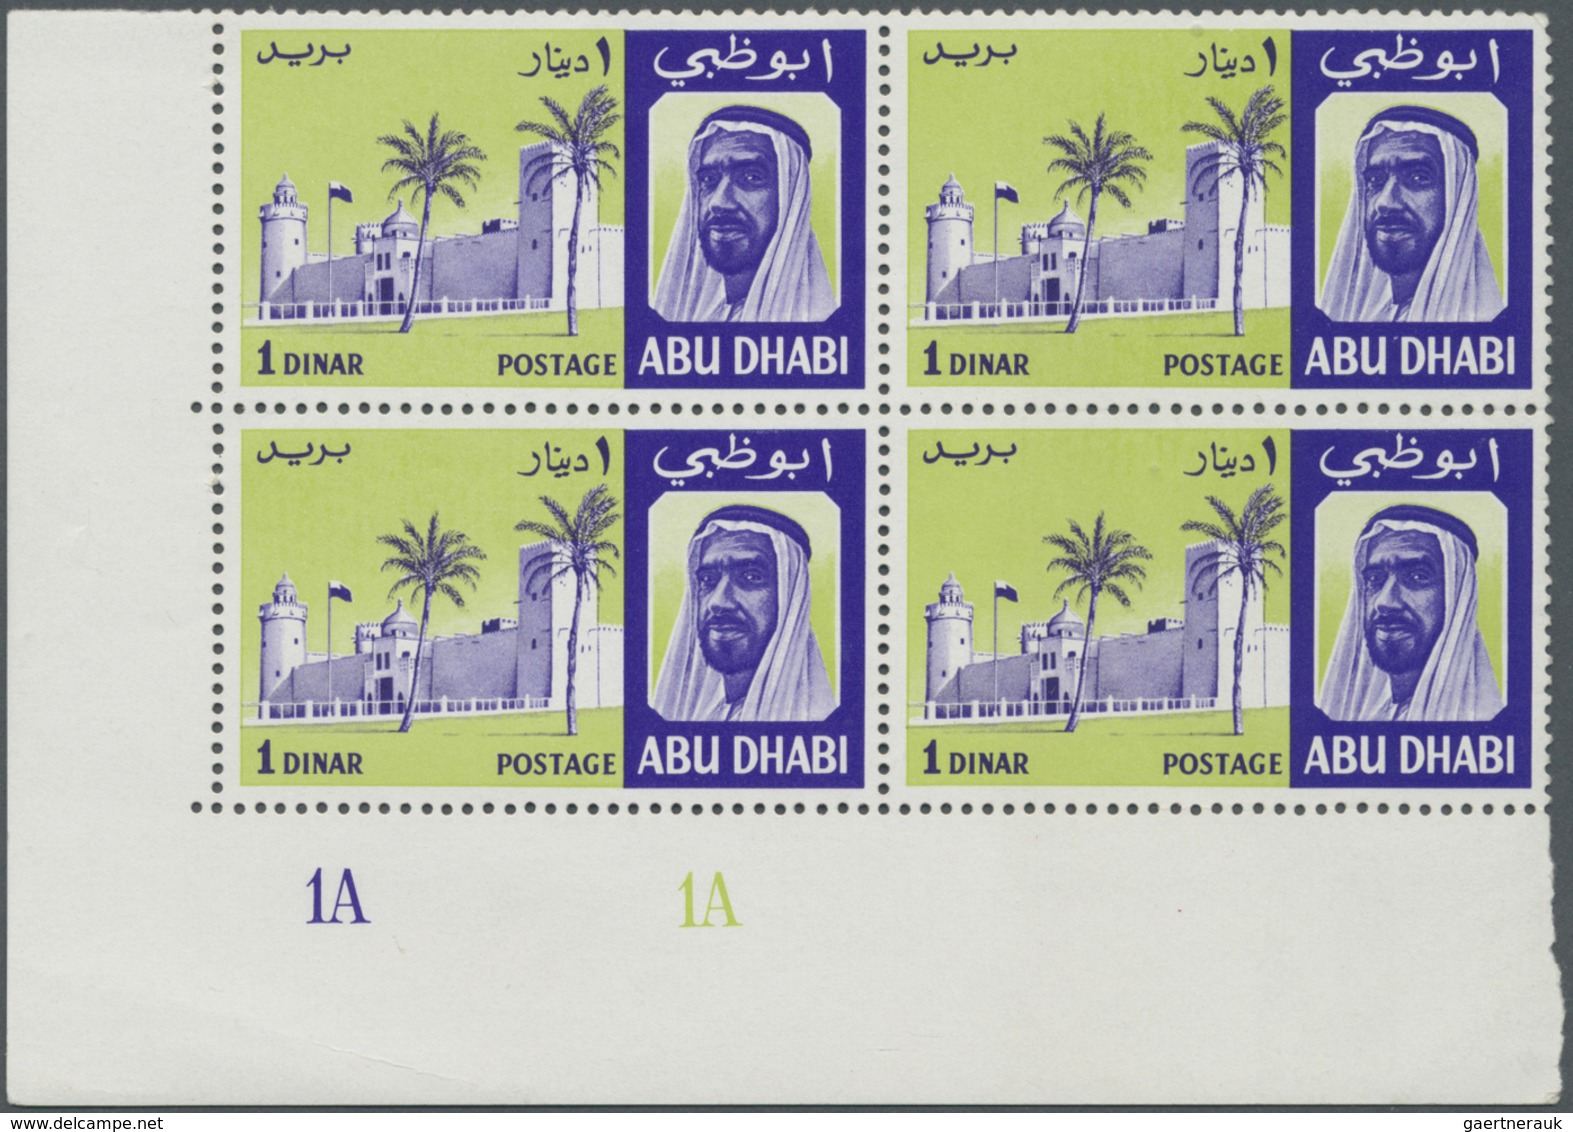 ** Abu Dhabi: 1967, Definitives, 100f. To 1d., Five Top Values Each As Plate Block From The Lower Left - Abu Dhabi